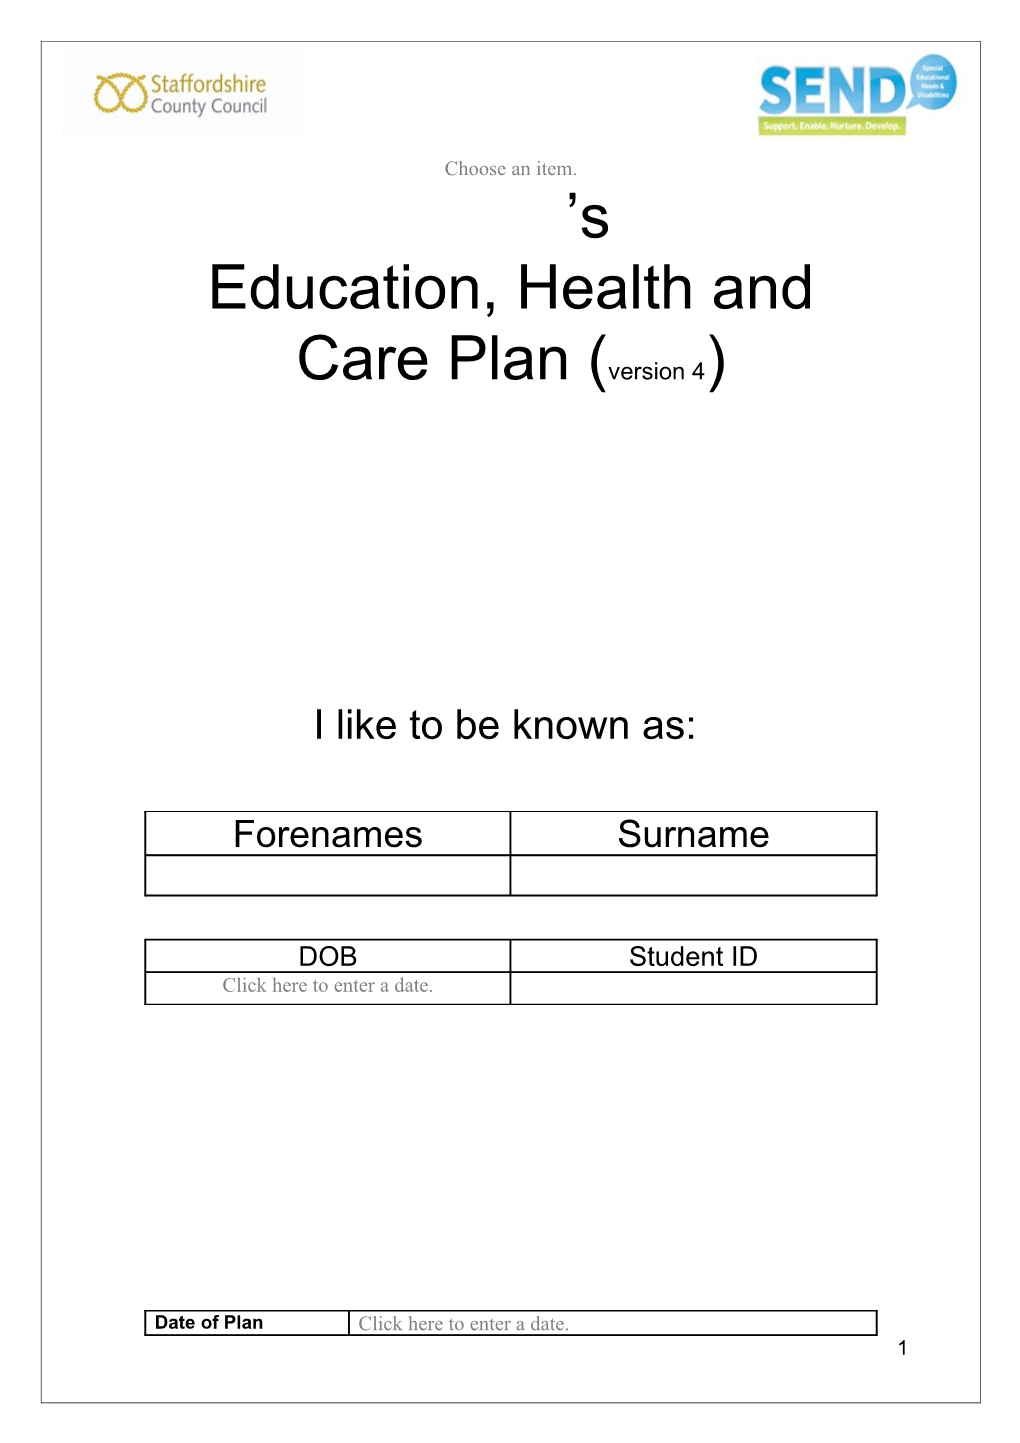 Education, Health and Care Plan (Version 4)